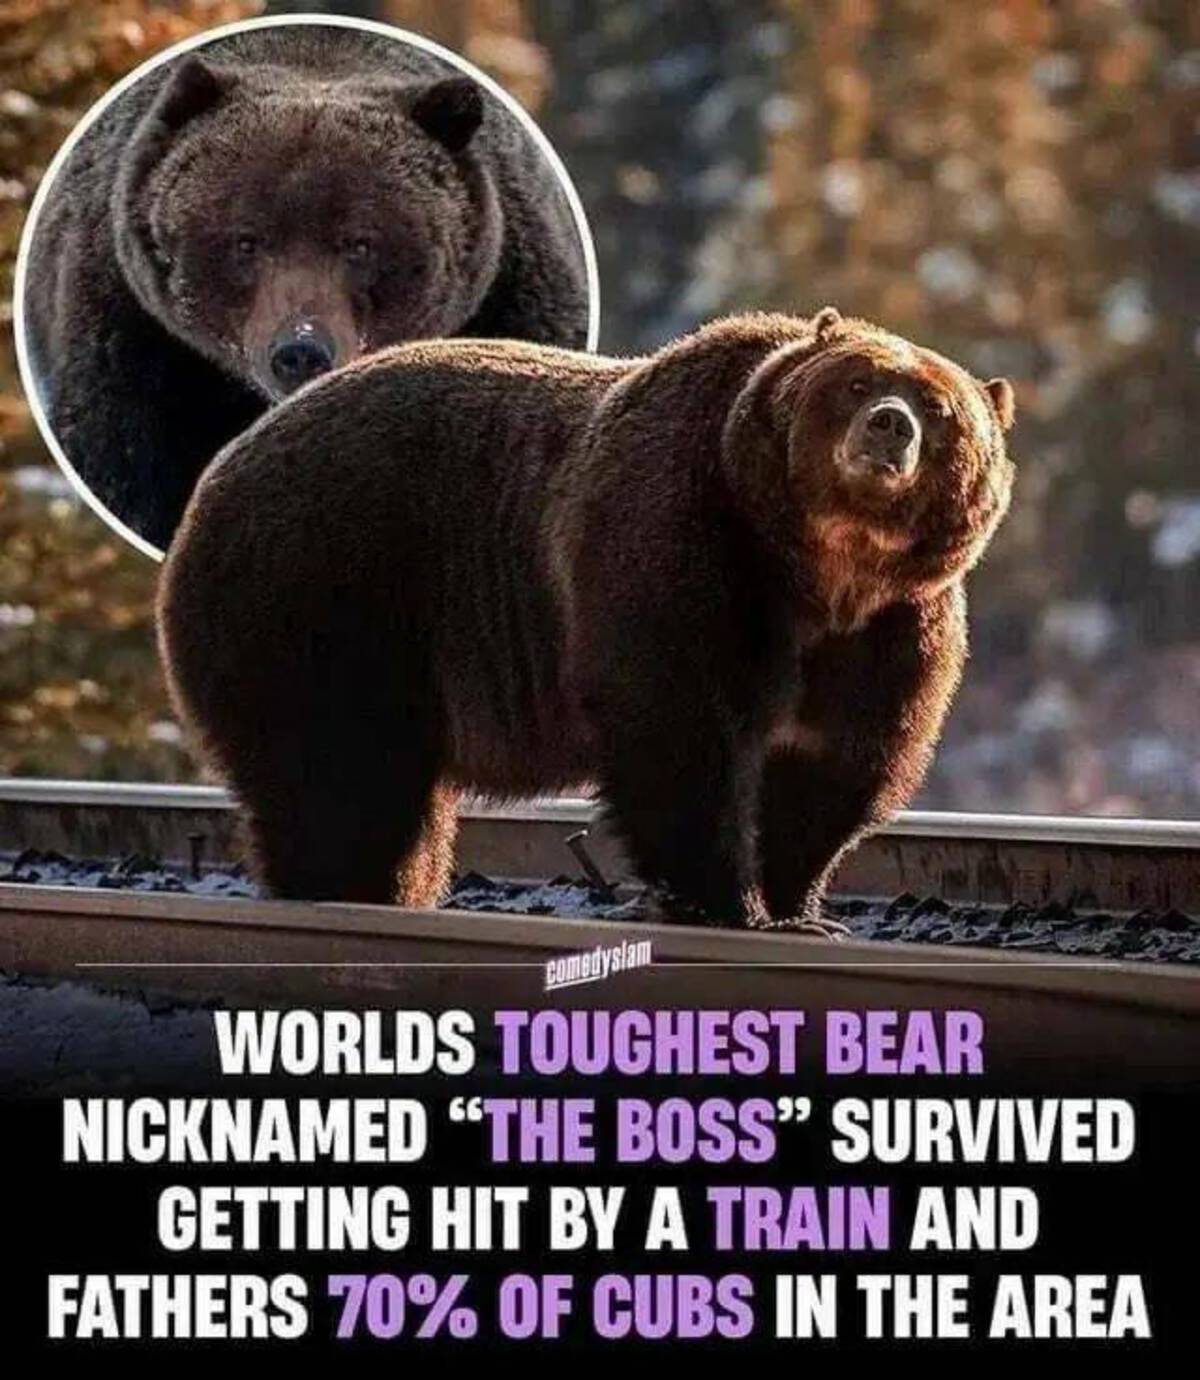 boss grizzly bear - Comedyslam Worlds Toughest Bear Nicknamed "The Boss" Survived Getting Hit By A Train And Fathers 70% Of Cubs In The Area